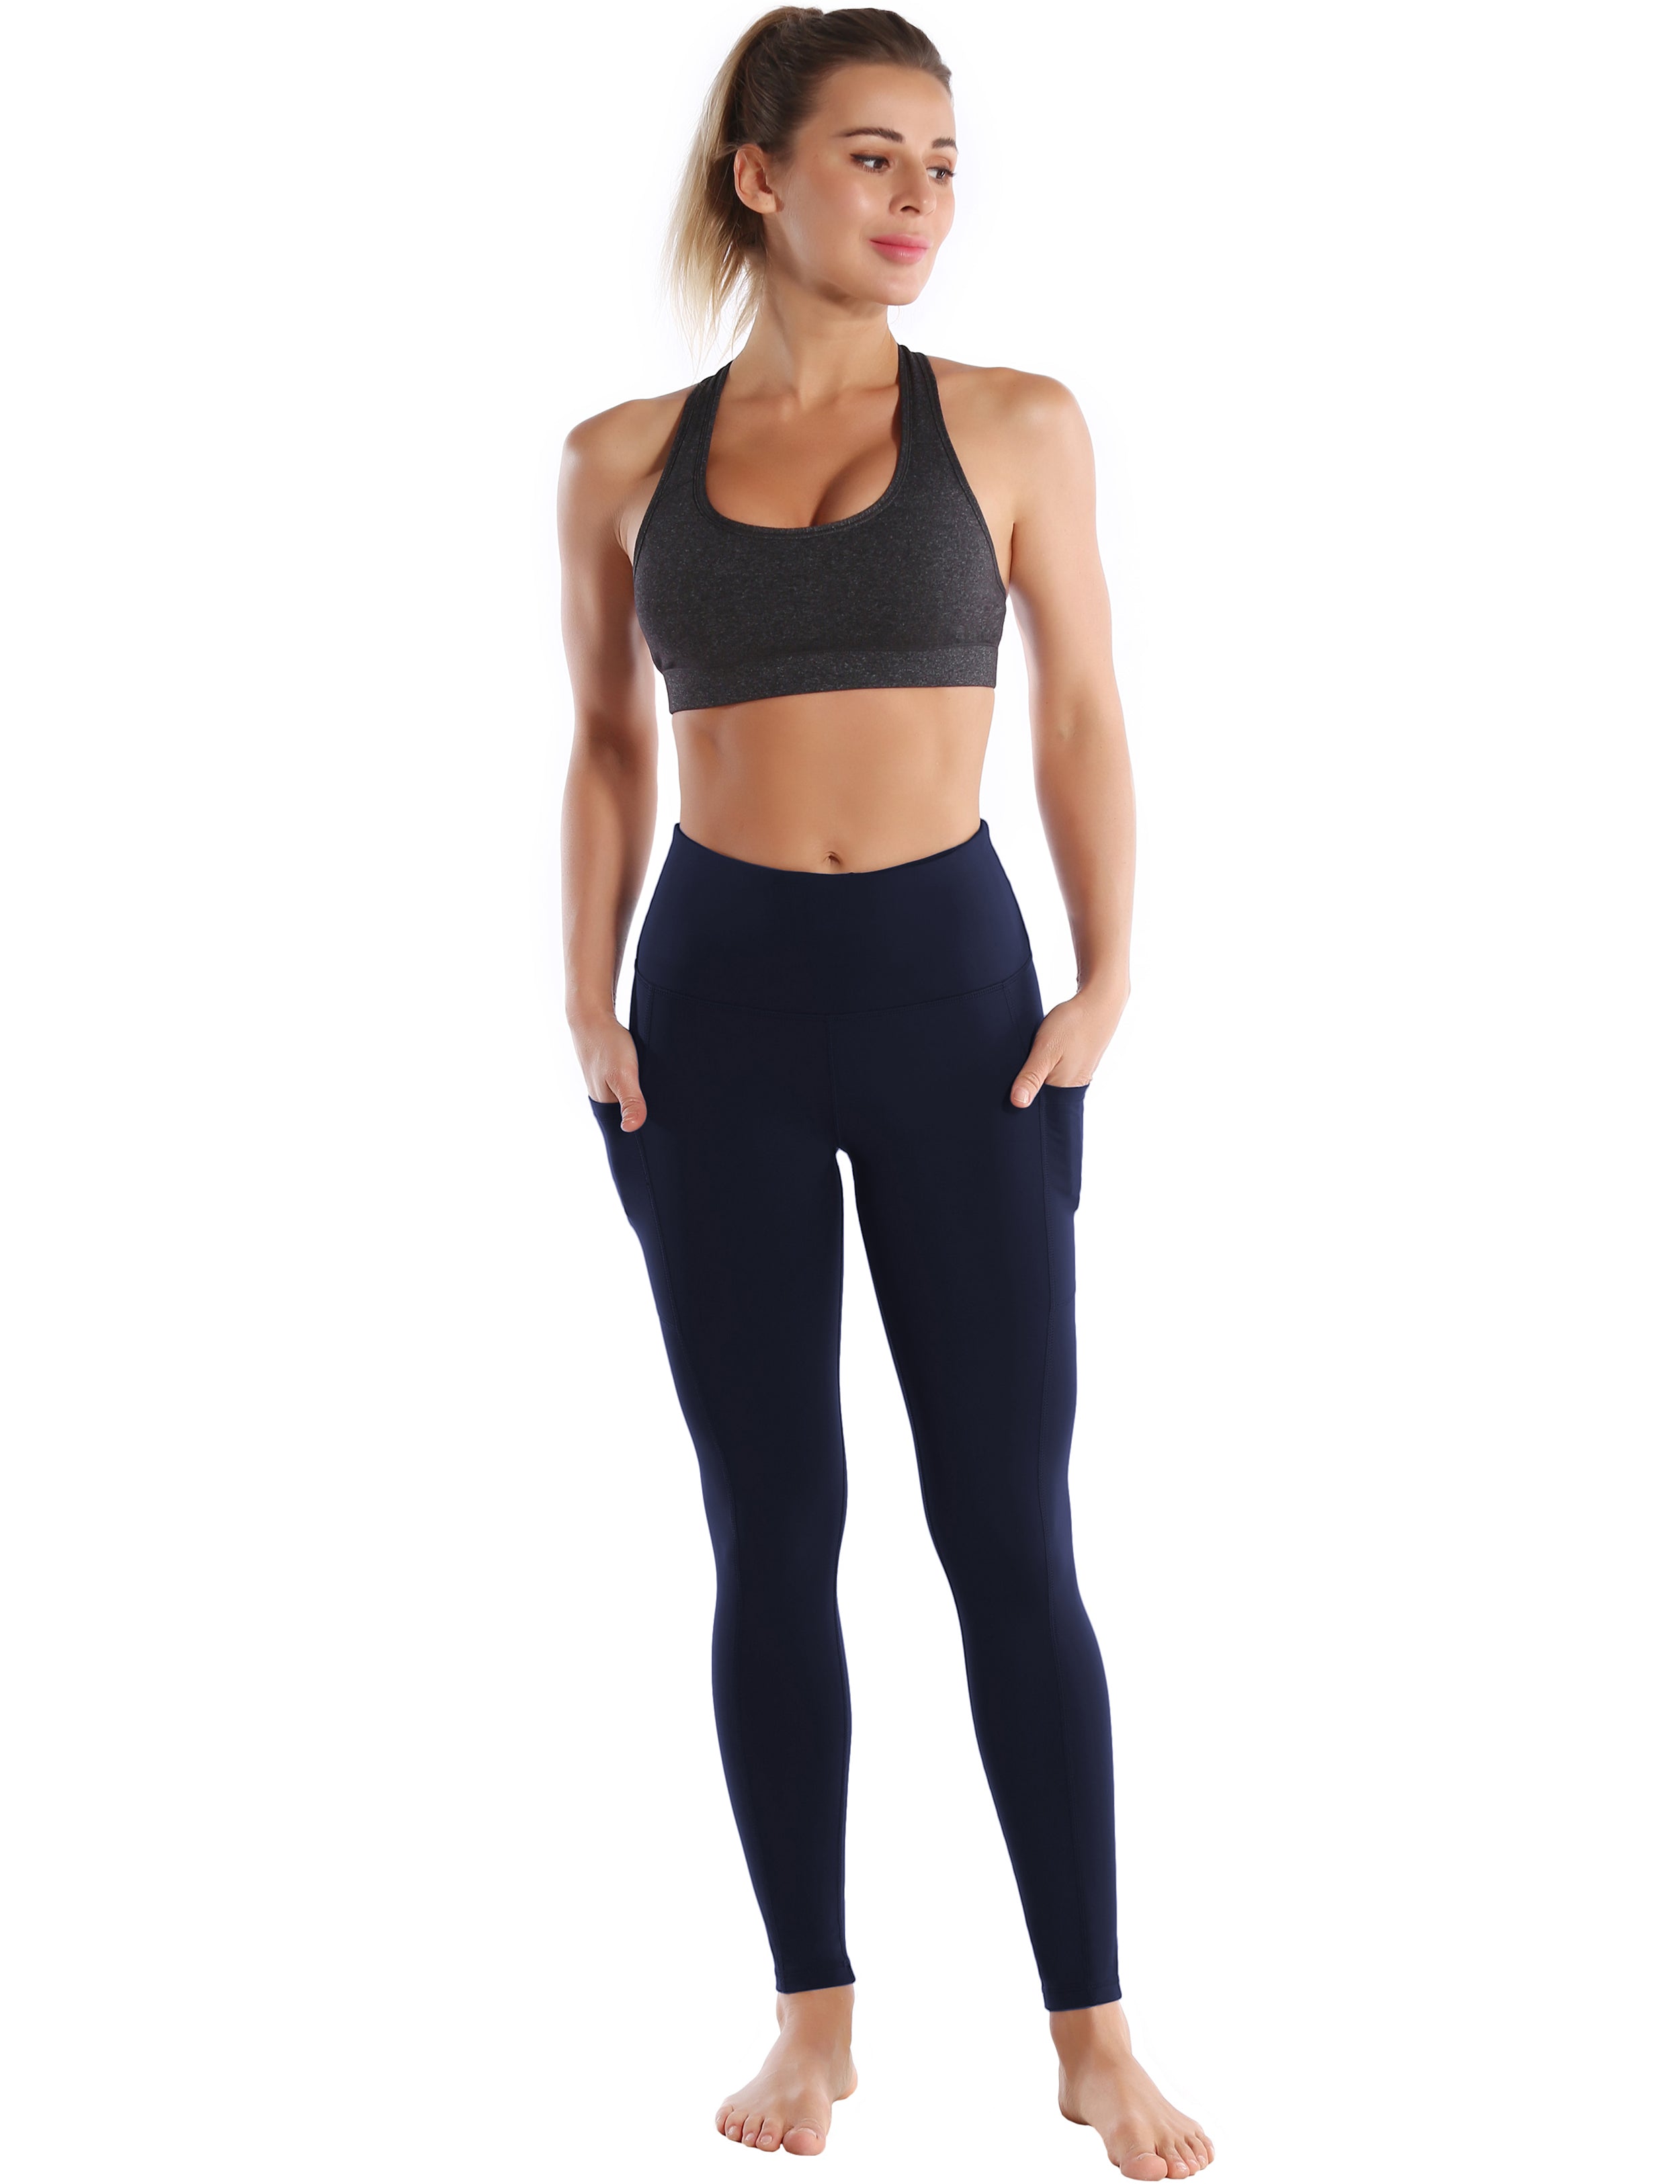 Hip Line Side Pockets yogastudio Pants darknavy Sexy Hip Line Side Pockets 75%Nylon/25%Spandex Fabric doesn't attract lint easily 4-way stretch No see-through Moisture-wicking Tummy control Inner pocket Two lengths